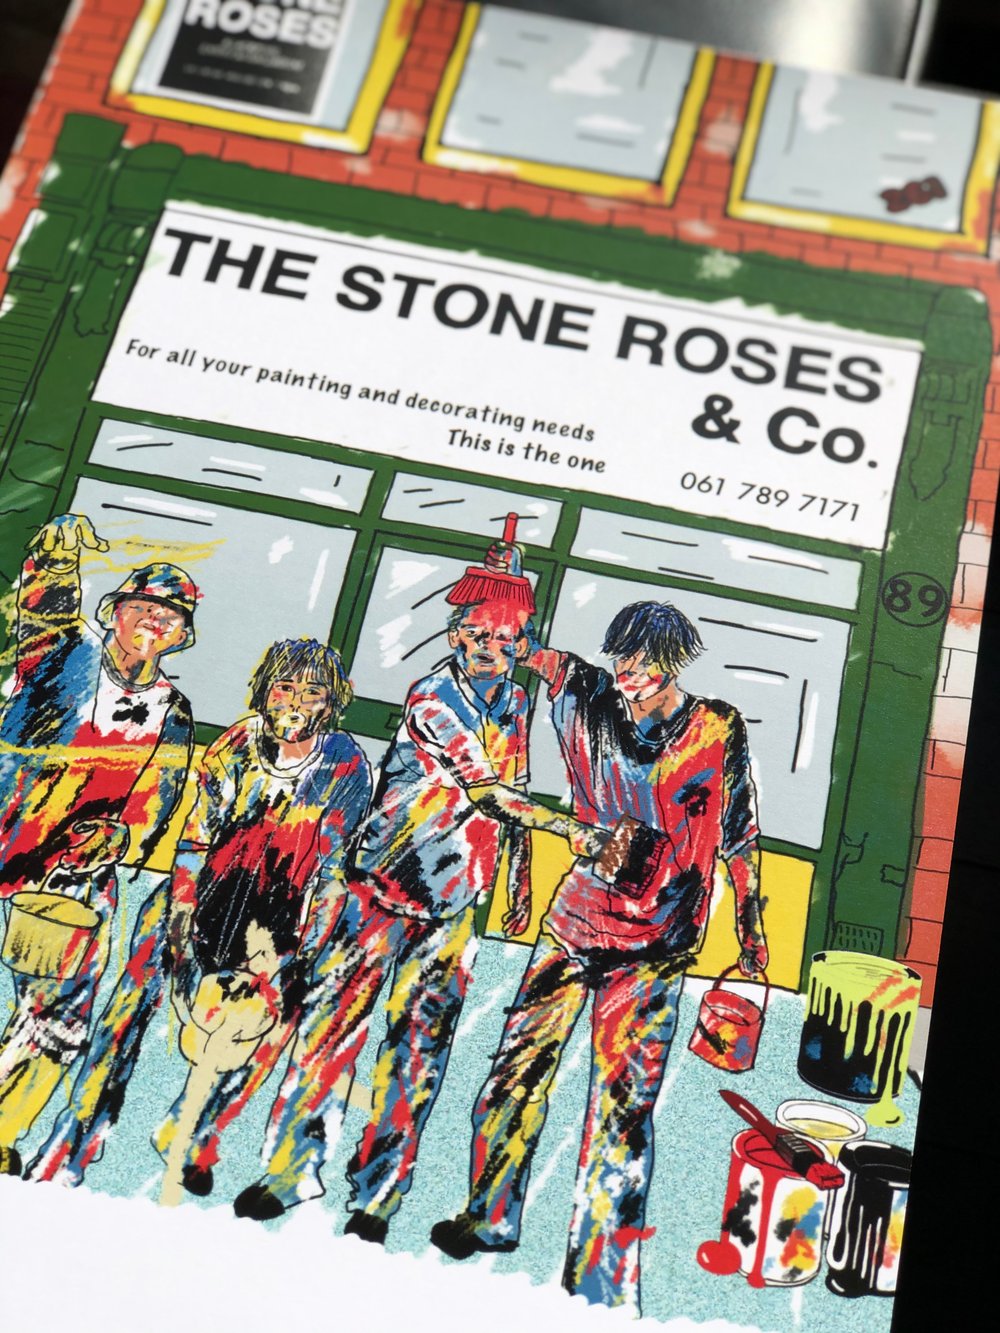 The Stone Roses painters and decorators 